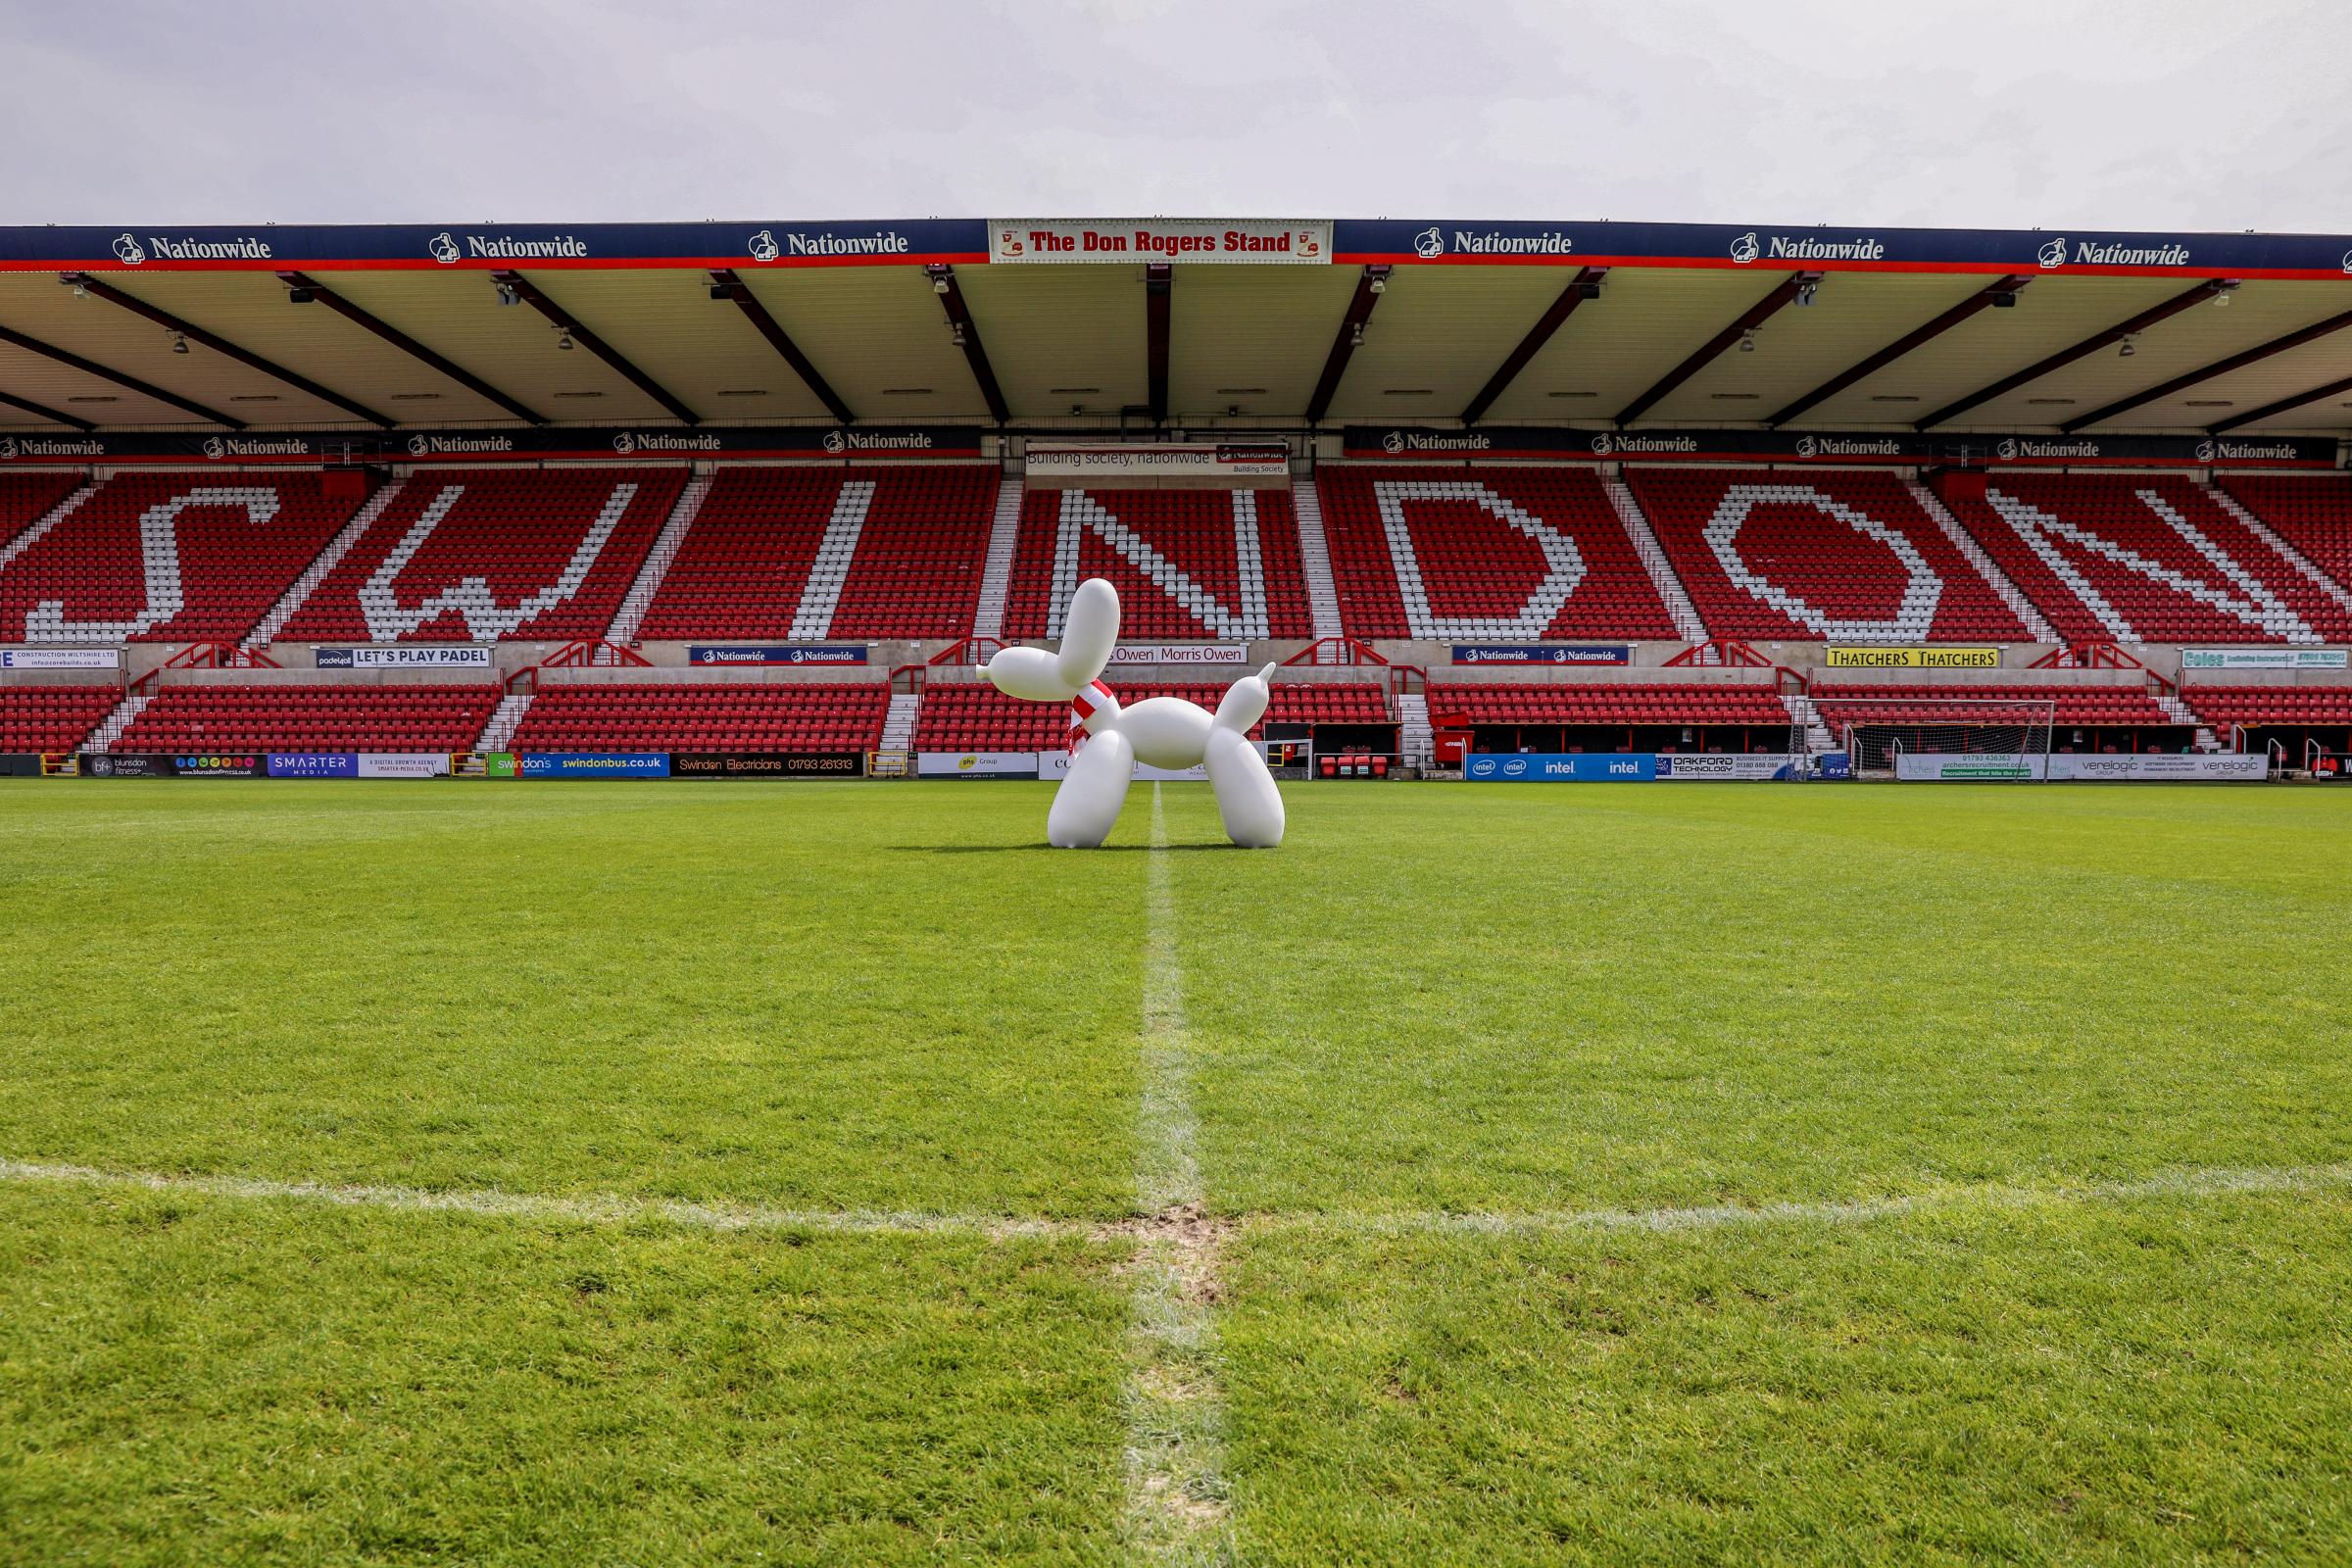 An unpainted Swindog sculpture at the County Ground. Picture: SIMON WARD PHOTOGRAPHY